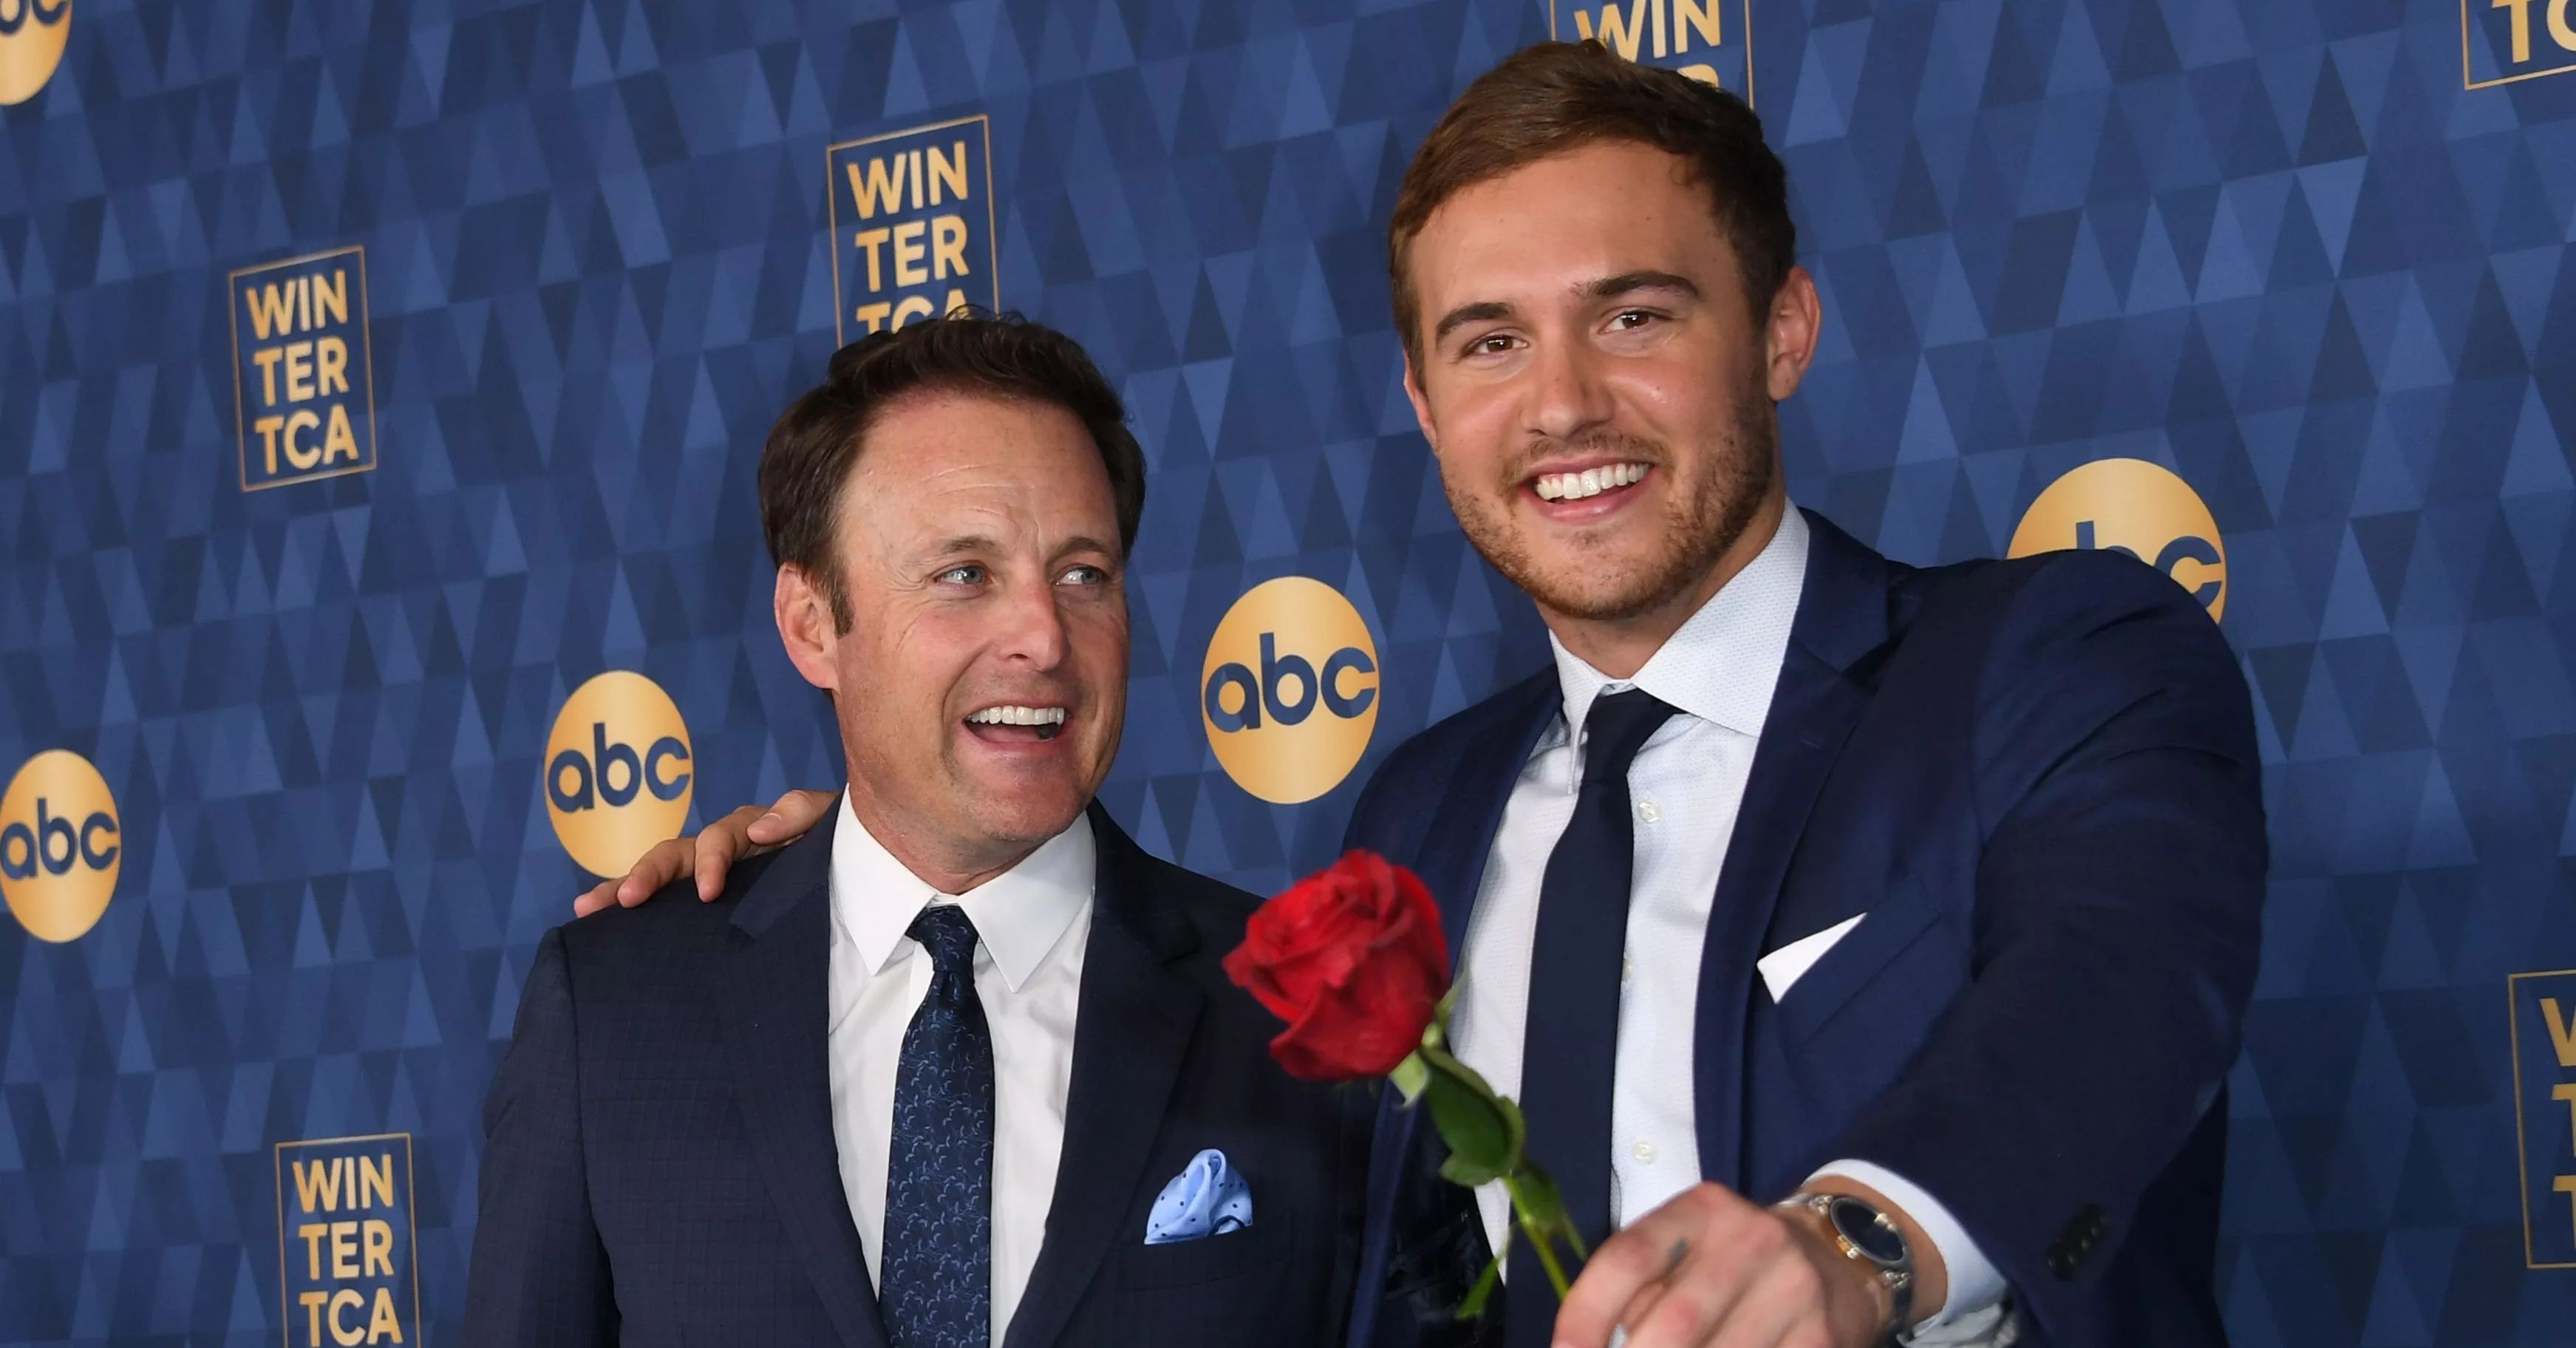 Who Is the First Eliminated From the Final Four on 'The Bachelor?'